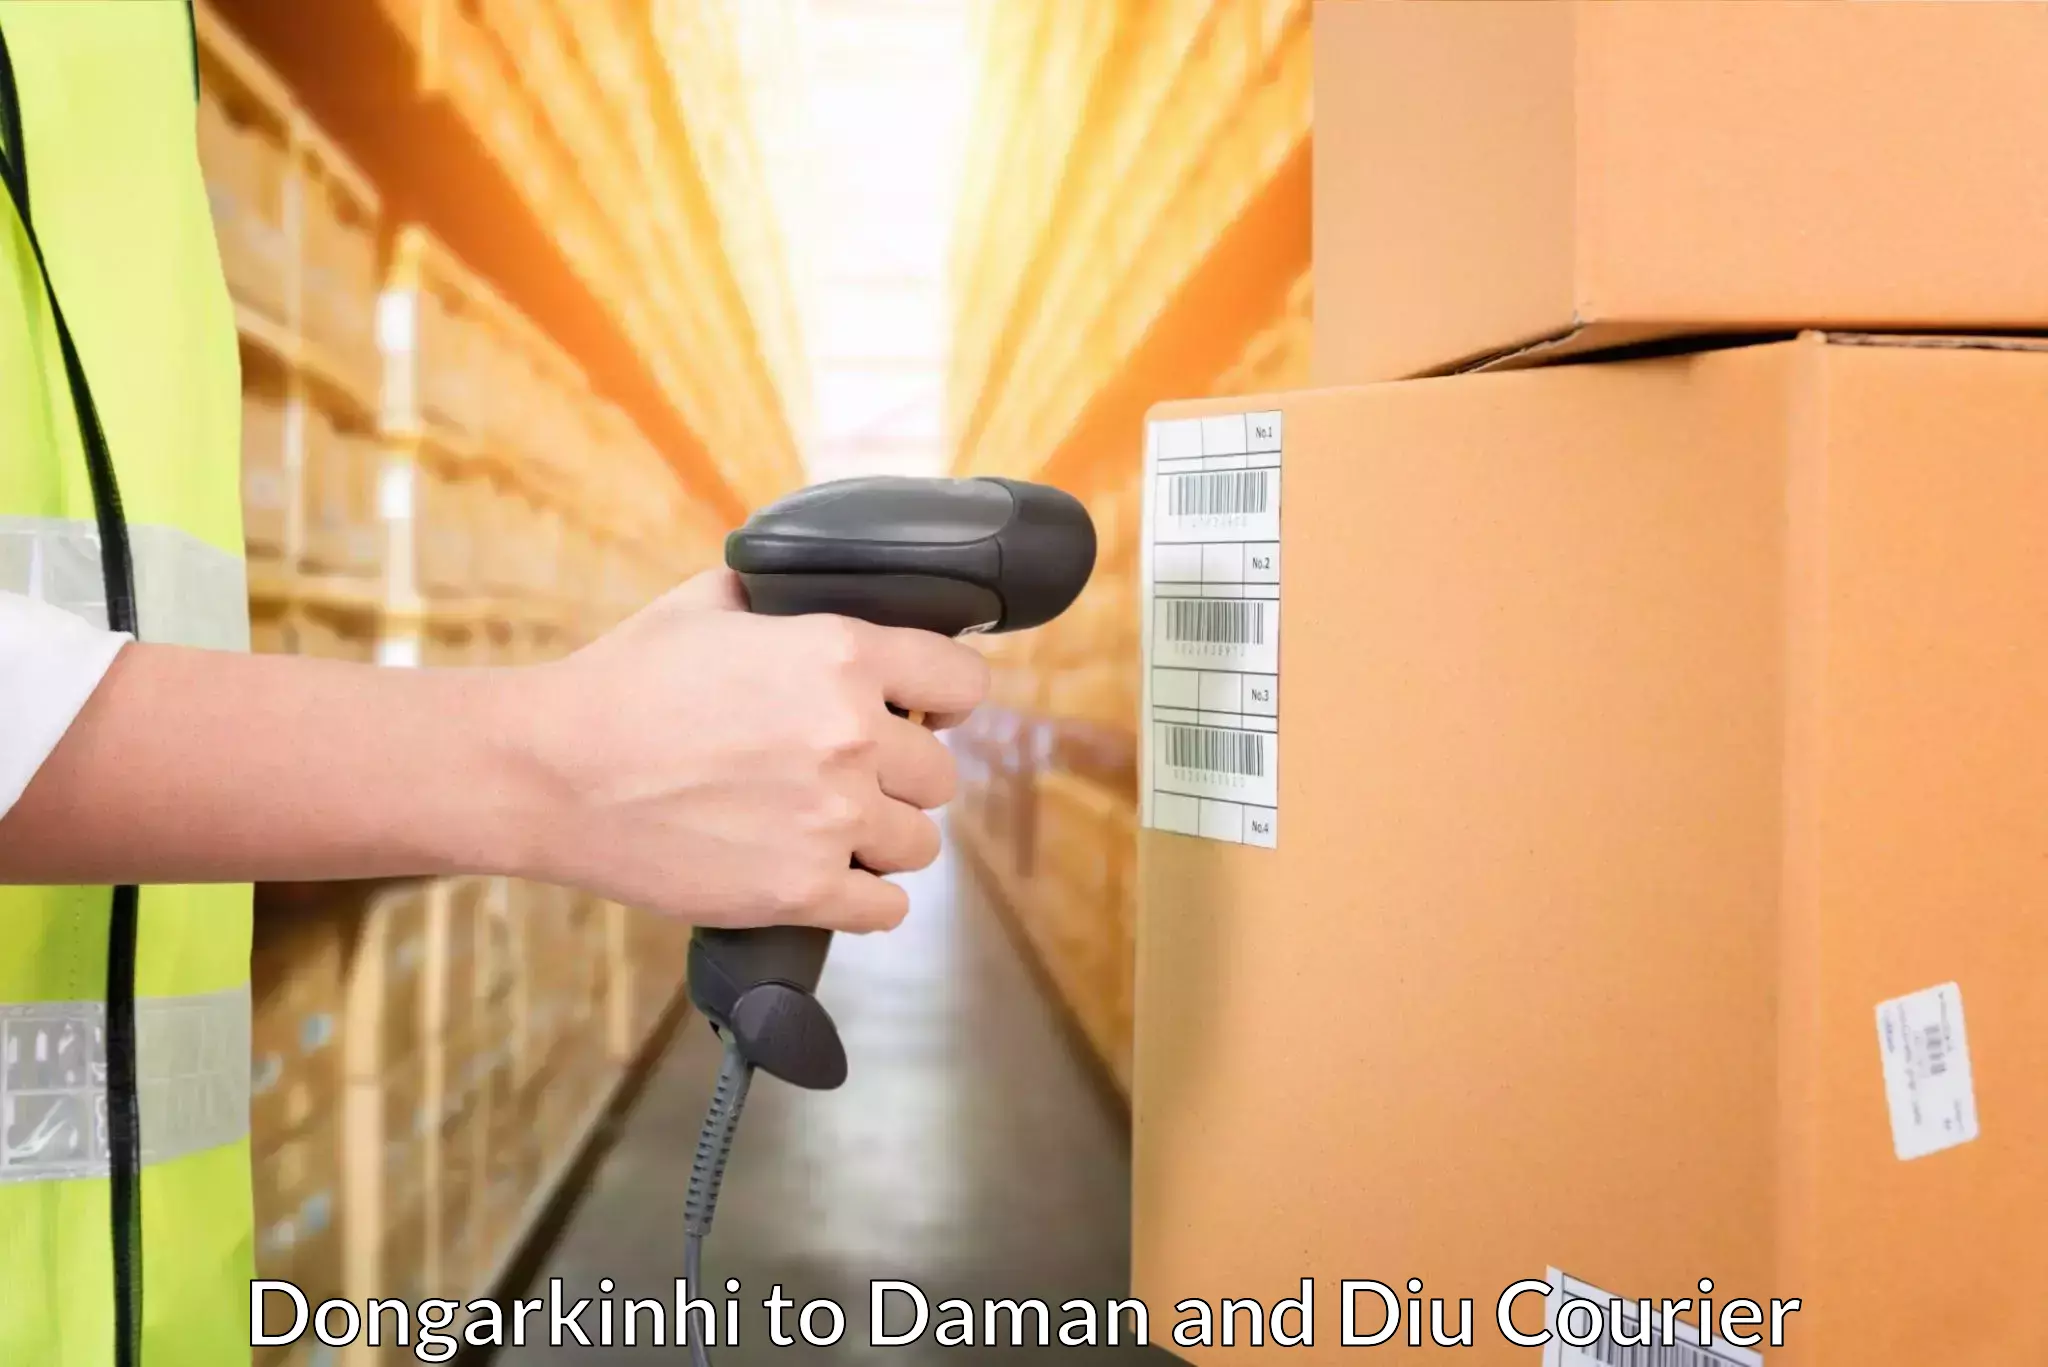 Small business couriers Dongarkinhi to Daman